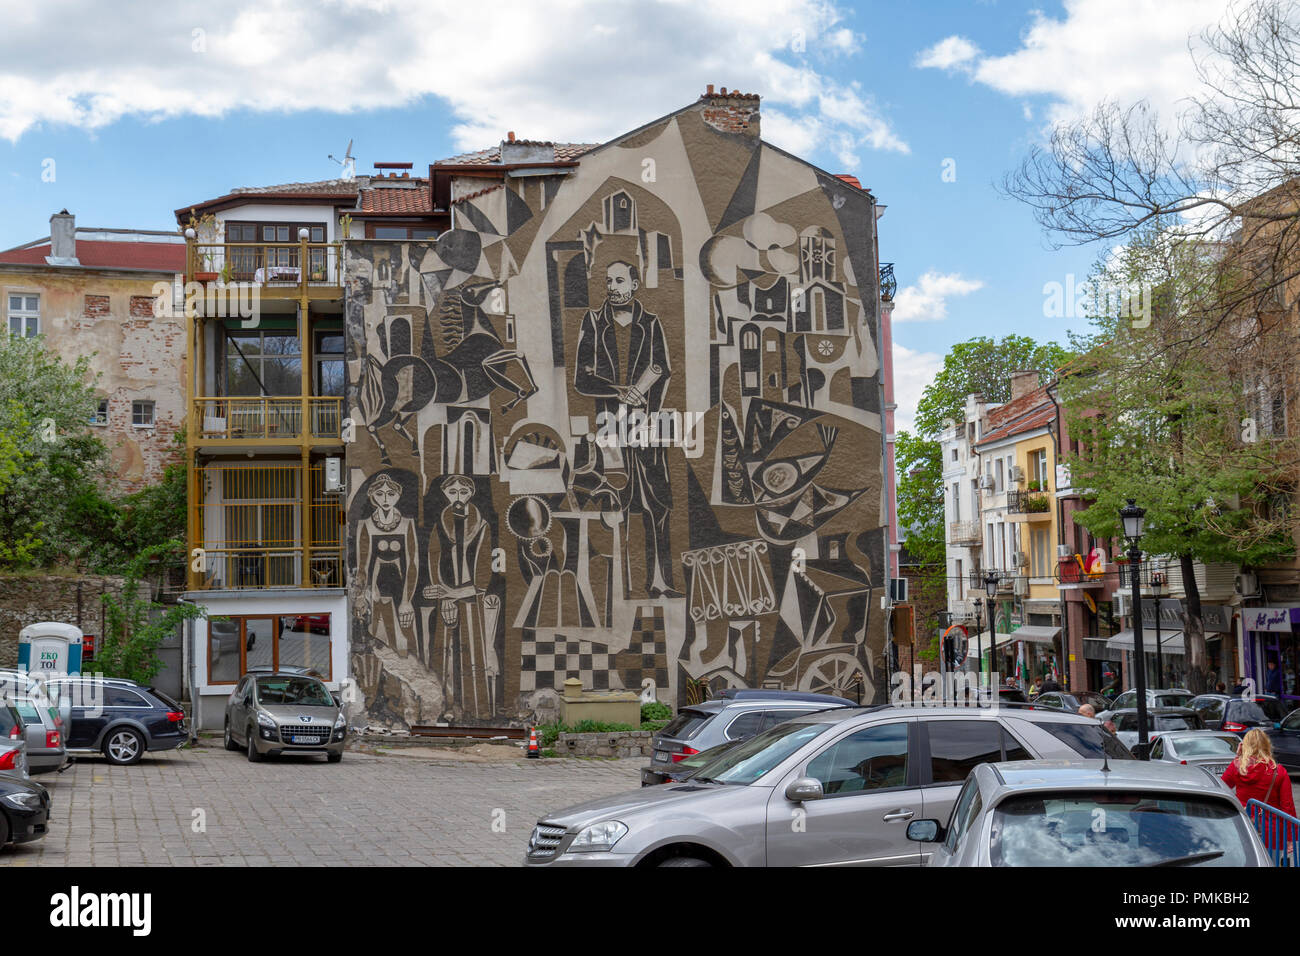 large wall mural on a building side in the Old Town area of Plovdiv, Bulgaria. Stock Photo